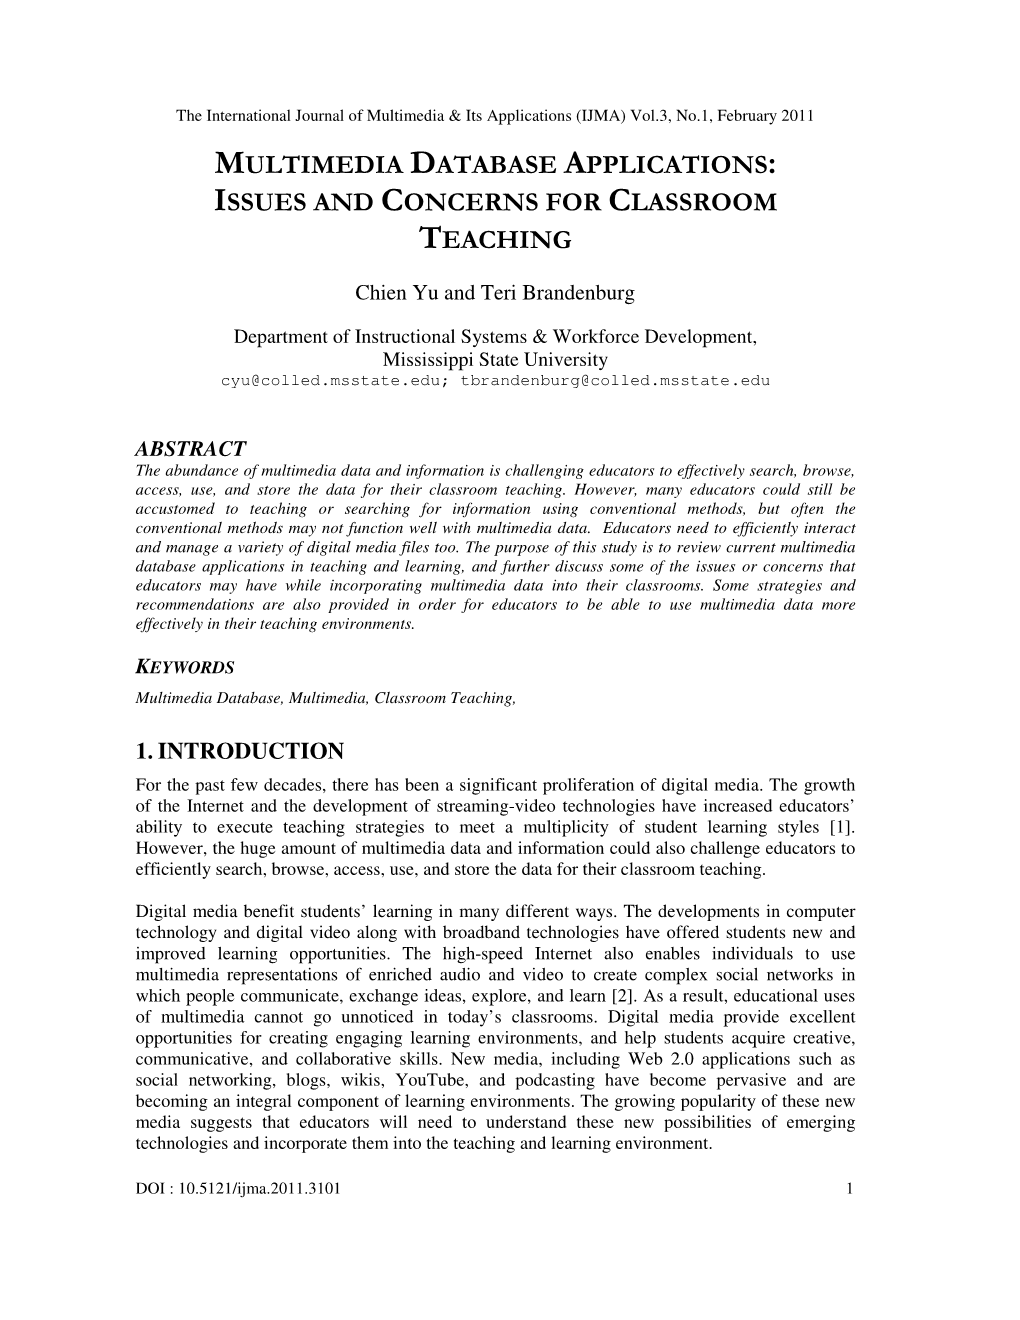 Multimedia Database Applications: Issues and Concerns for Classroom Teaching